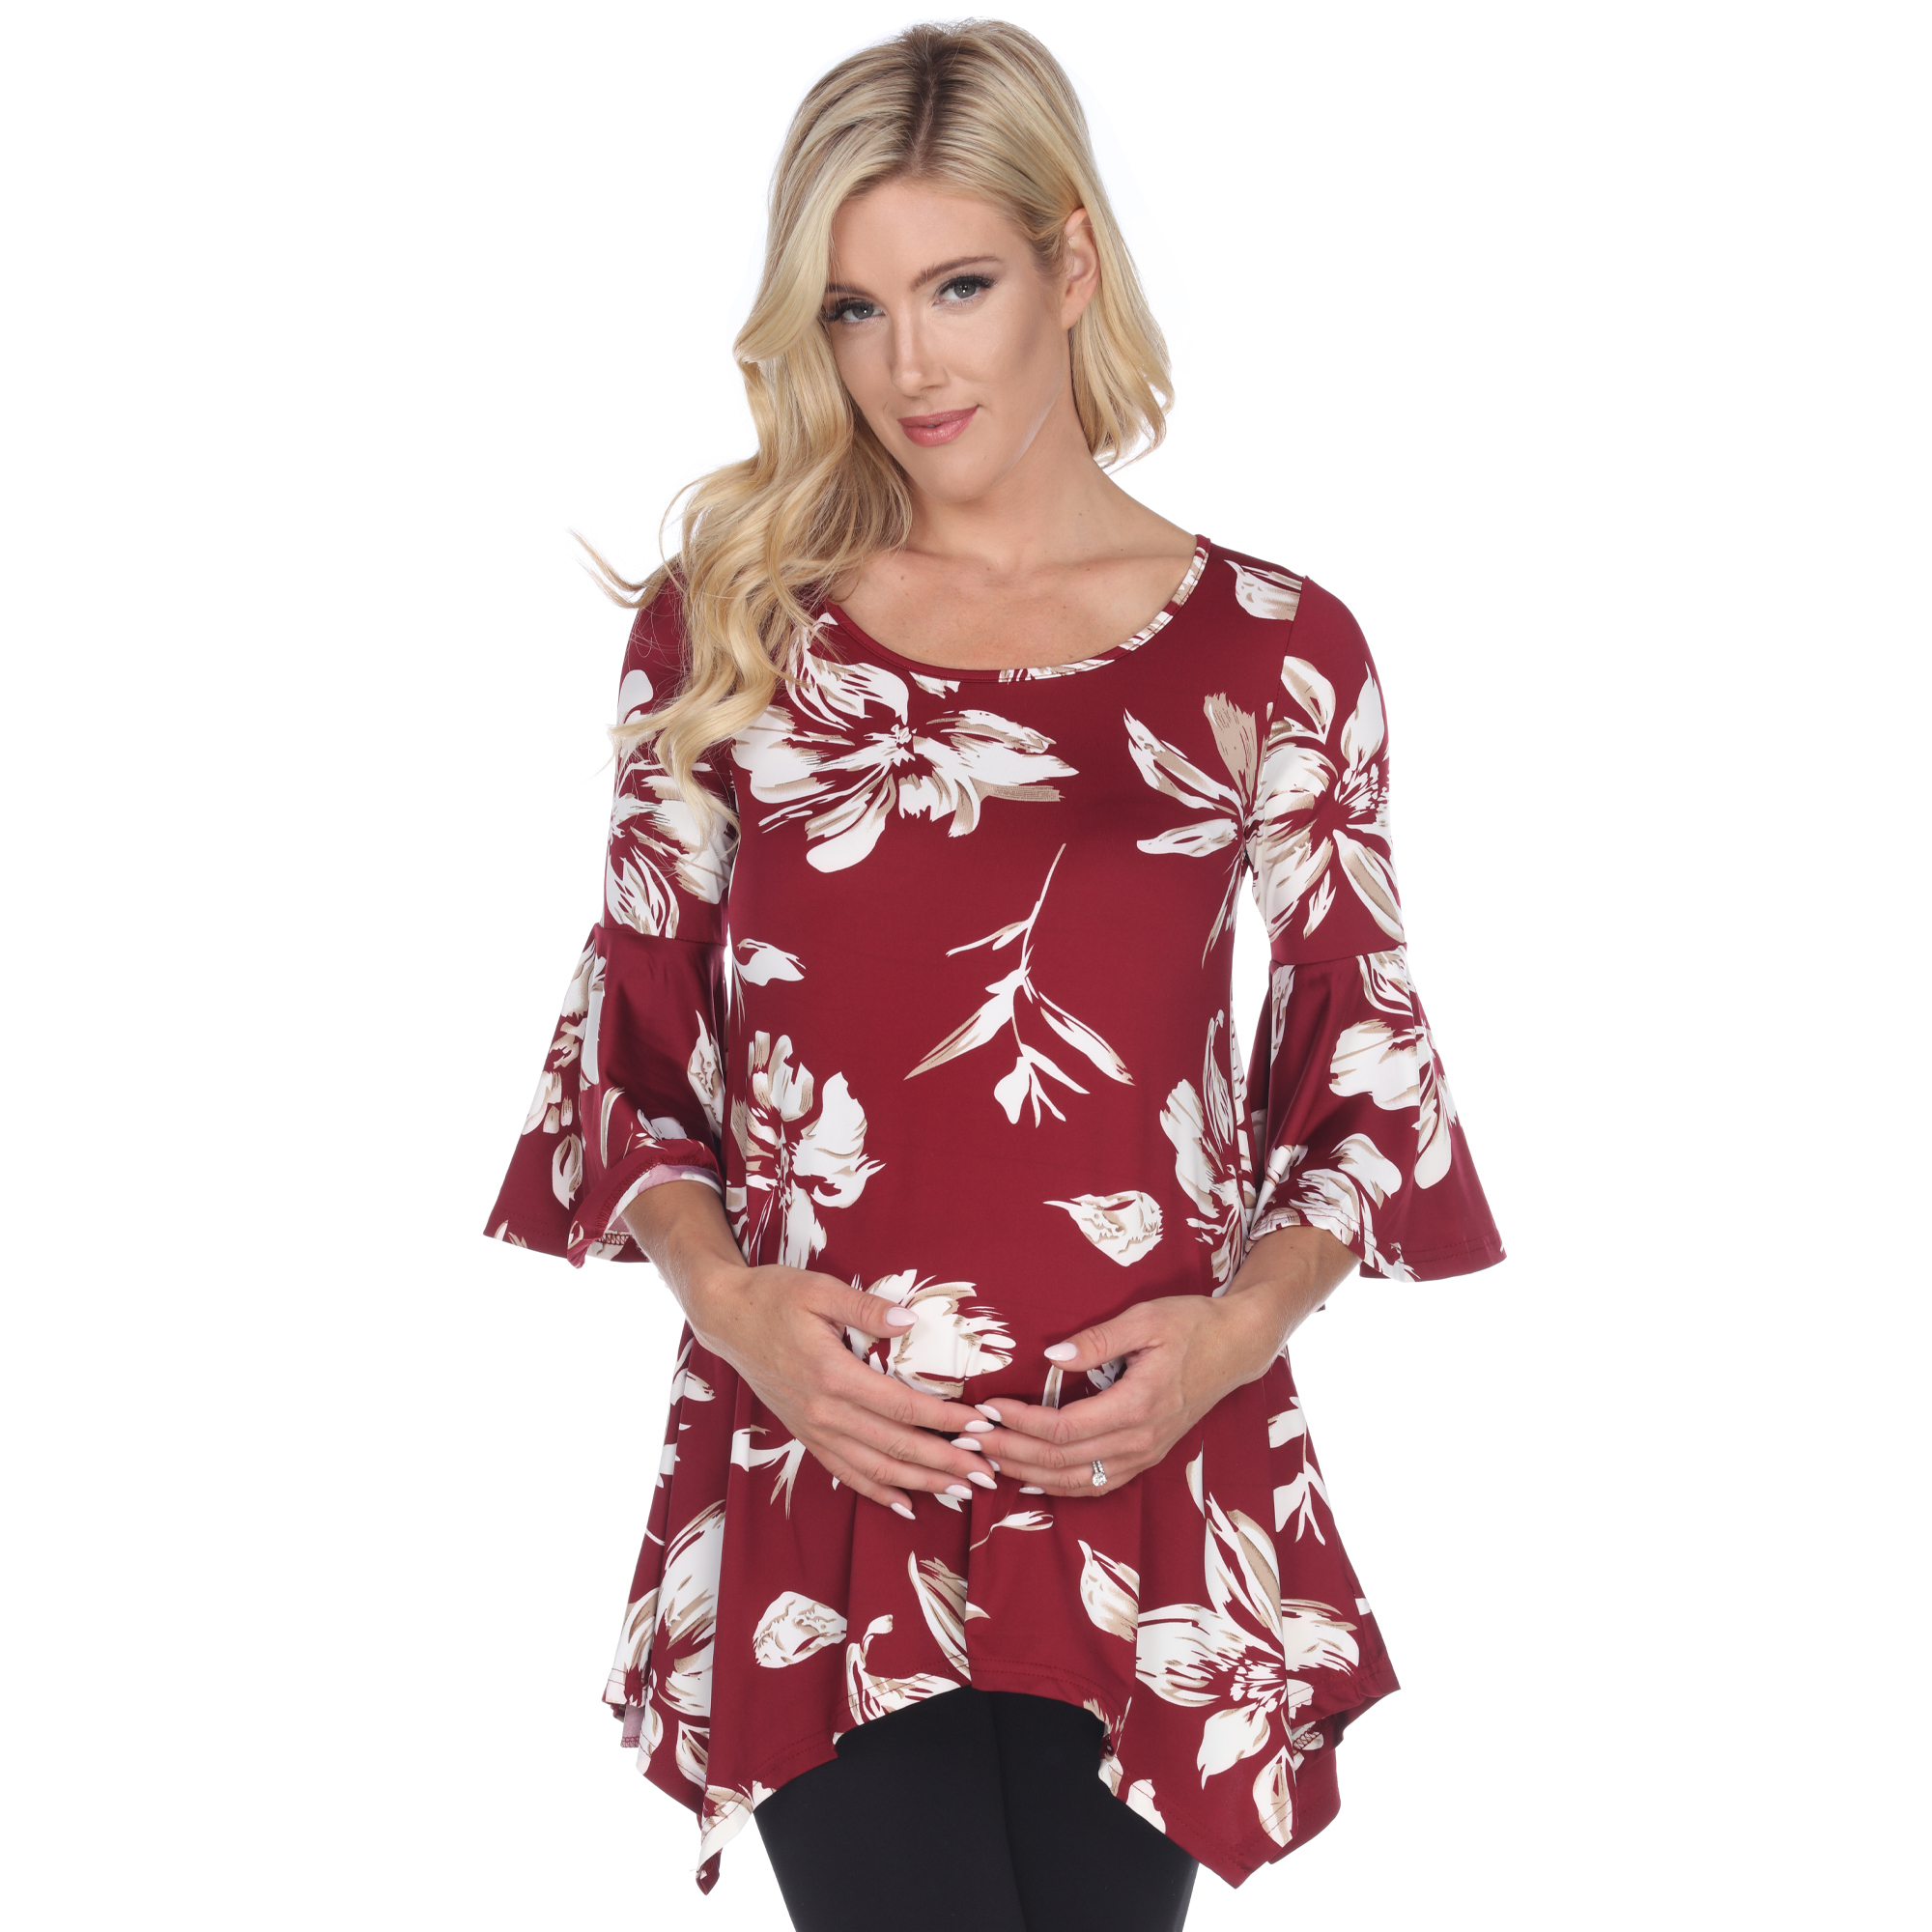 White Mark Women's Maternity Floral Print Quarter Sleeve Tunic Top With Pockets - Black, 2X